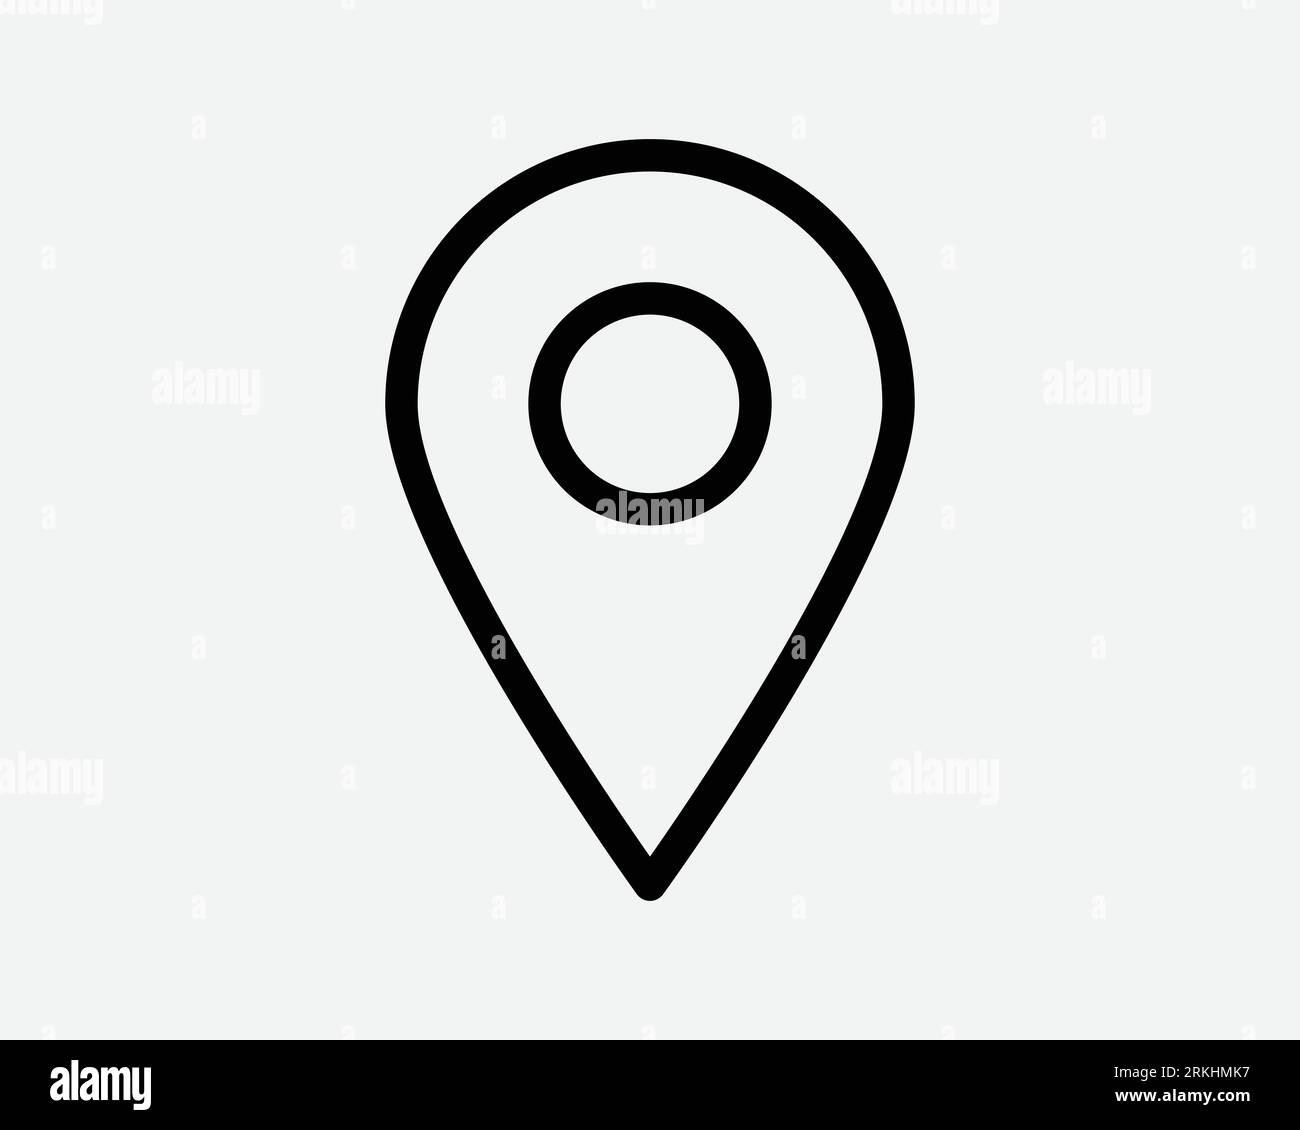 Location Pin Line Icon Position Direction GPS Map Geography Travel Trip Navigation Place Thin Black Outline Shape Vector Symbol Sign Mark Button App Stock Vector